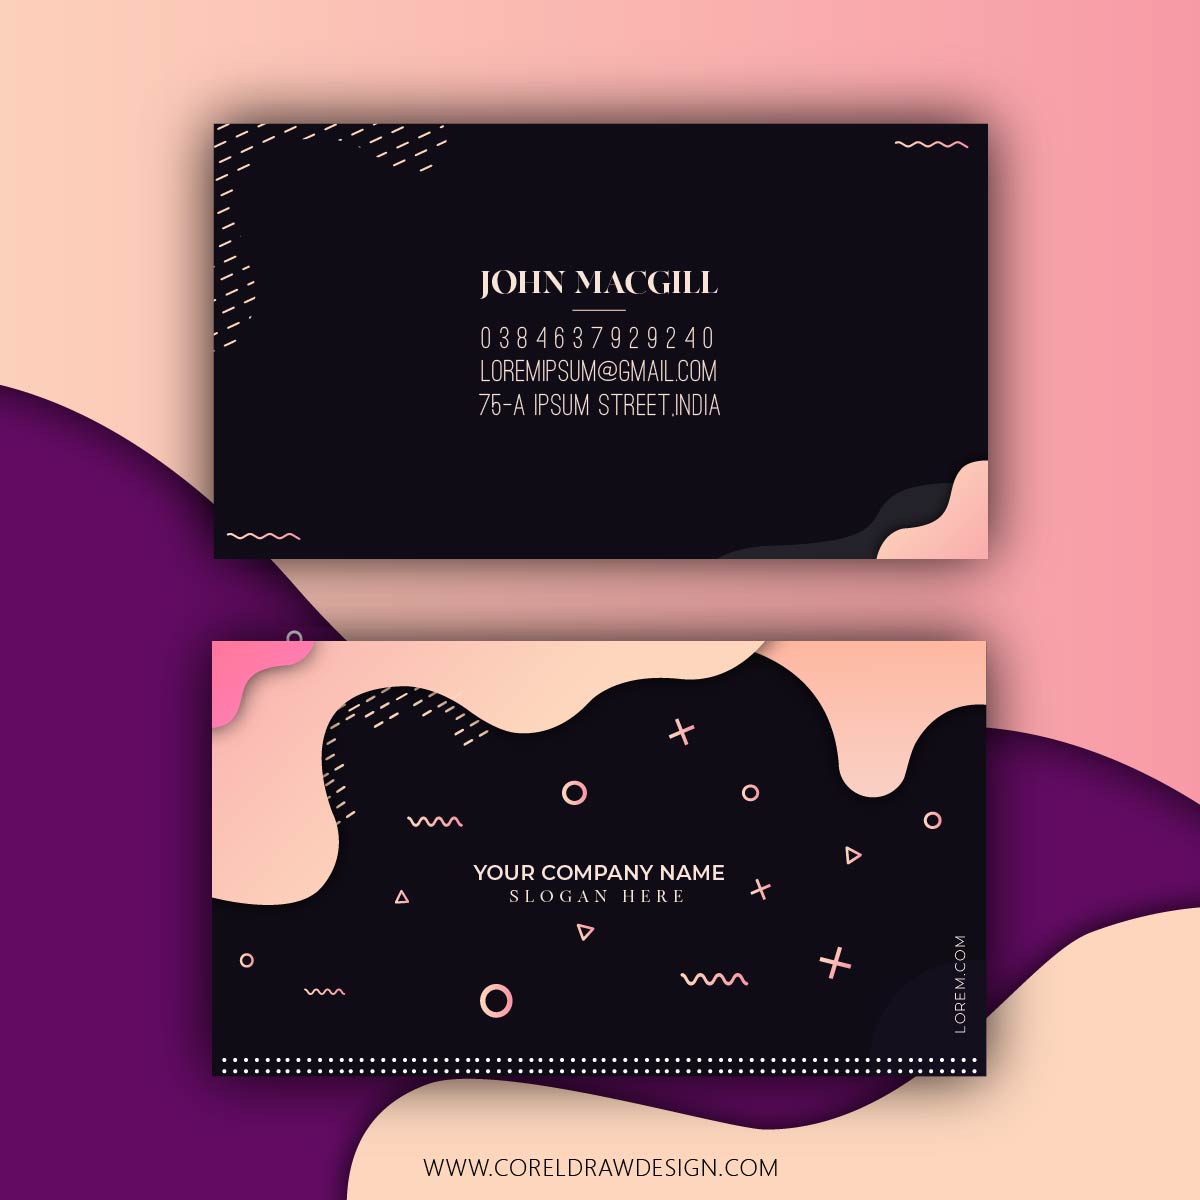 Playful Colorful Business Card Template